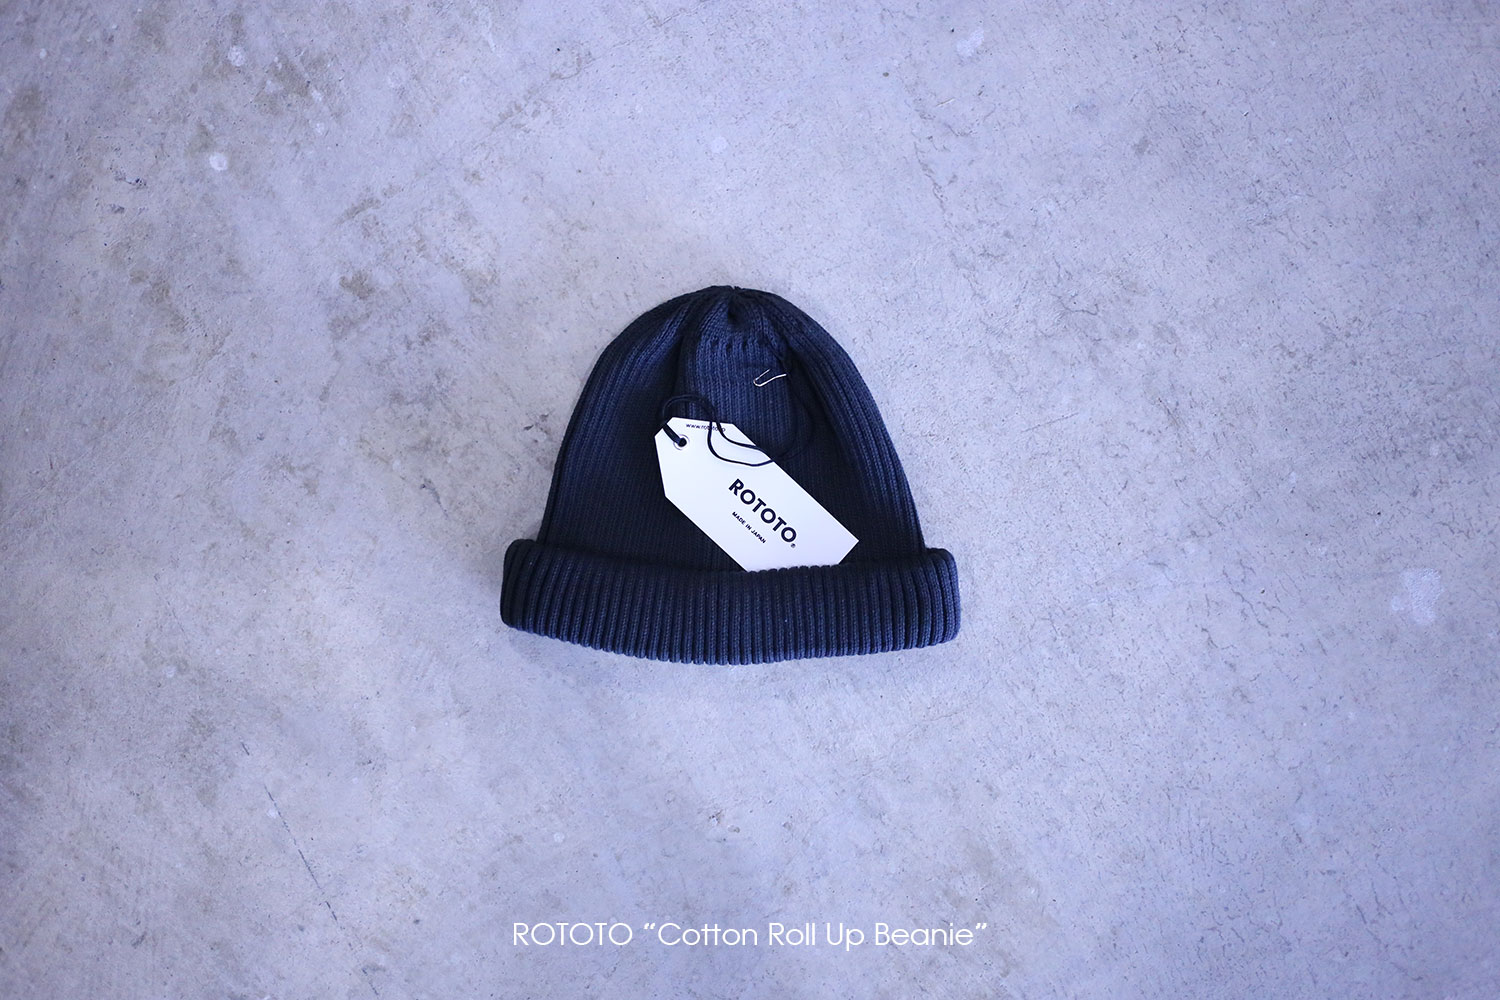 ROTOTO "Cotton Roll Up Beanie"